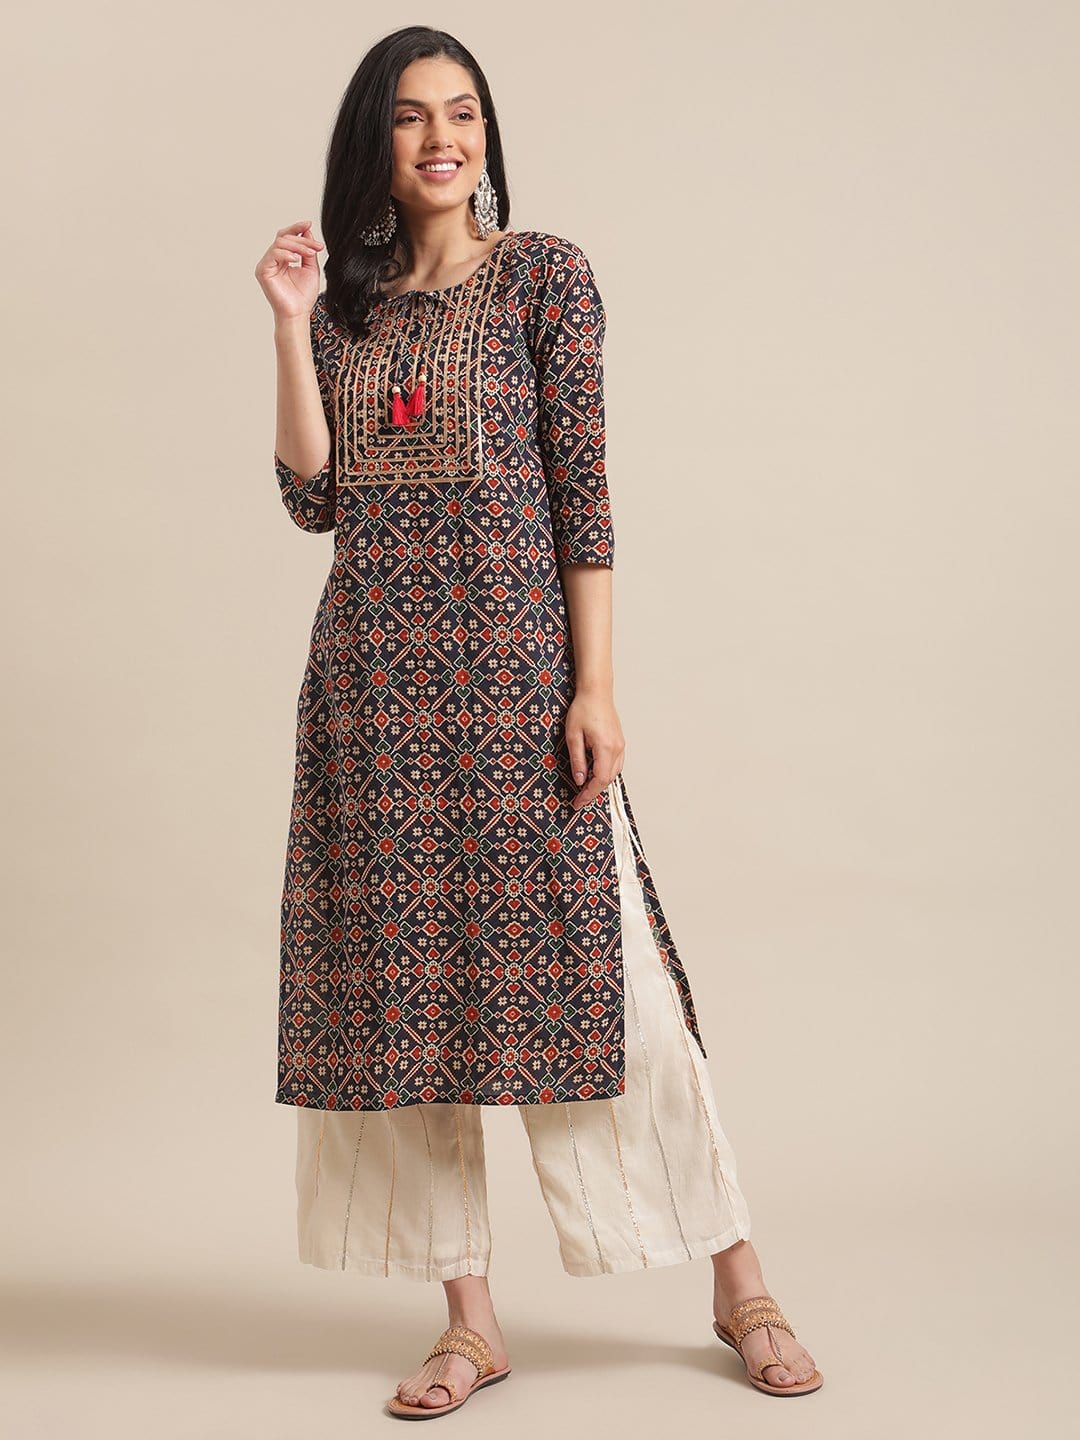 Women's Blue And Maroon Abstract Printed Kurta With Gota Work On Yoke And 3/4Th Sleeves - Final Clearance Sale